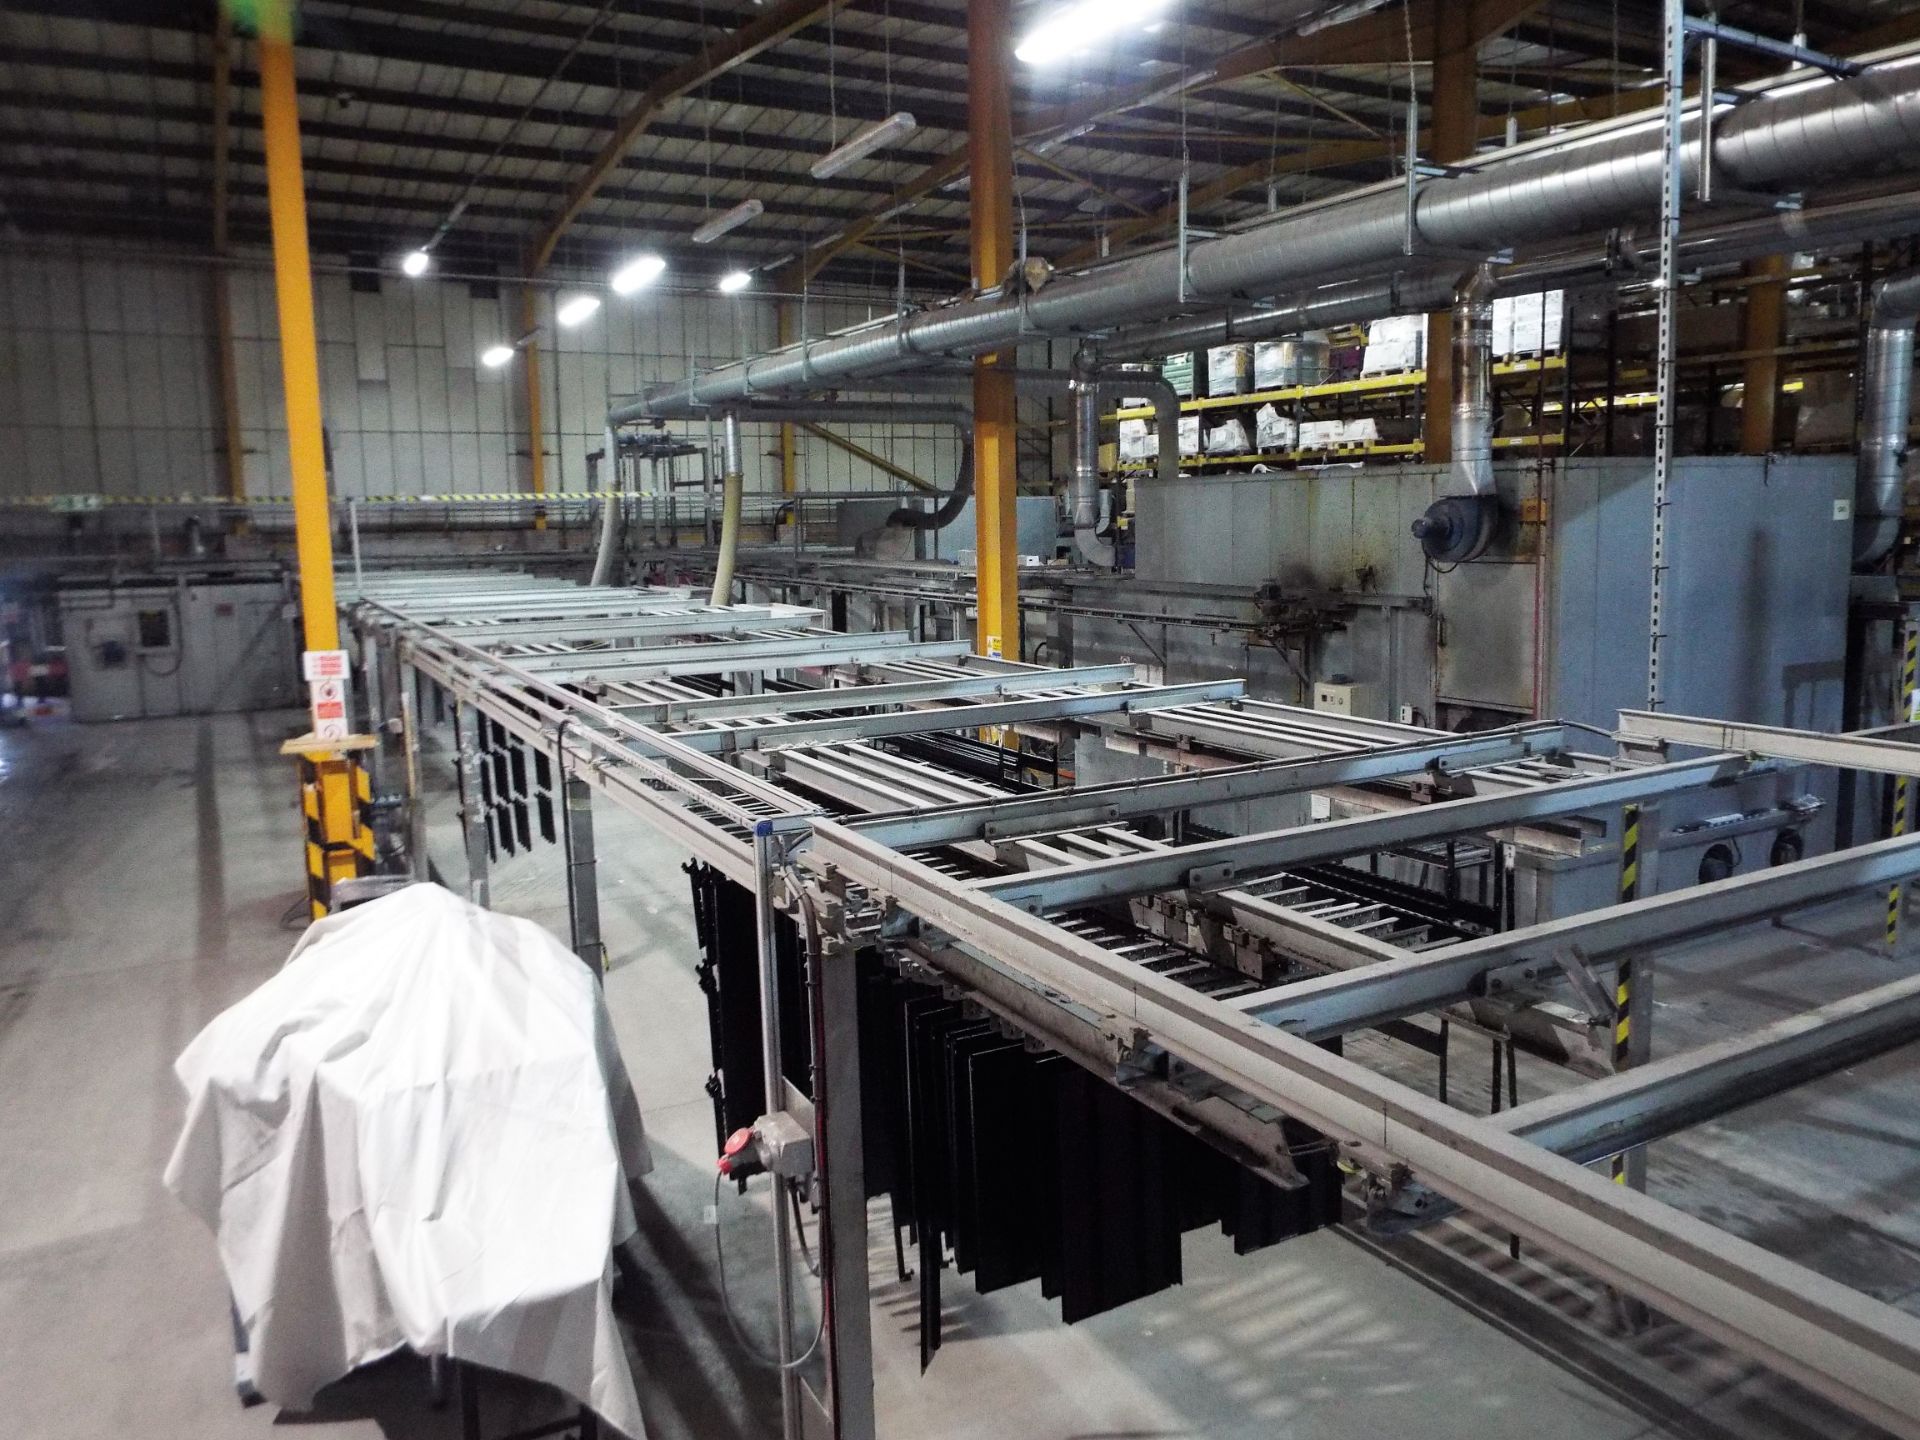 The Complete Contents Of A Highly Versatile & Adaptable Powder Coating Facility. - Image 2 of 14